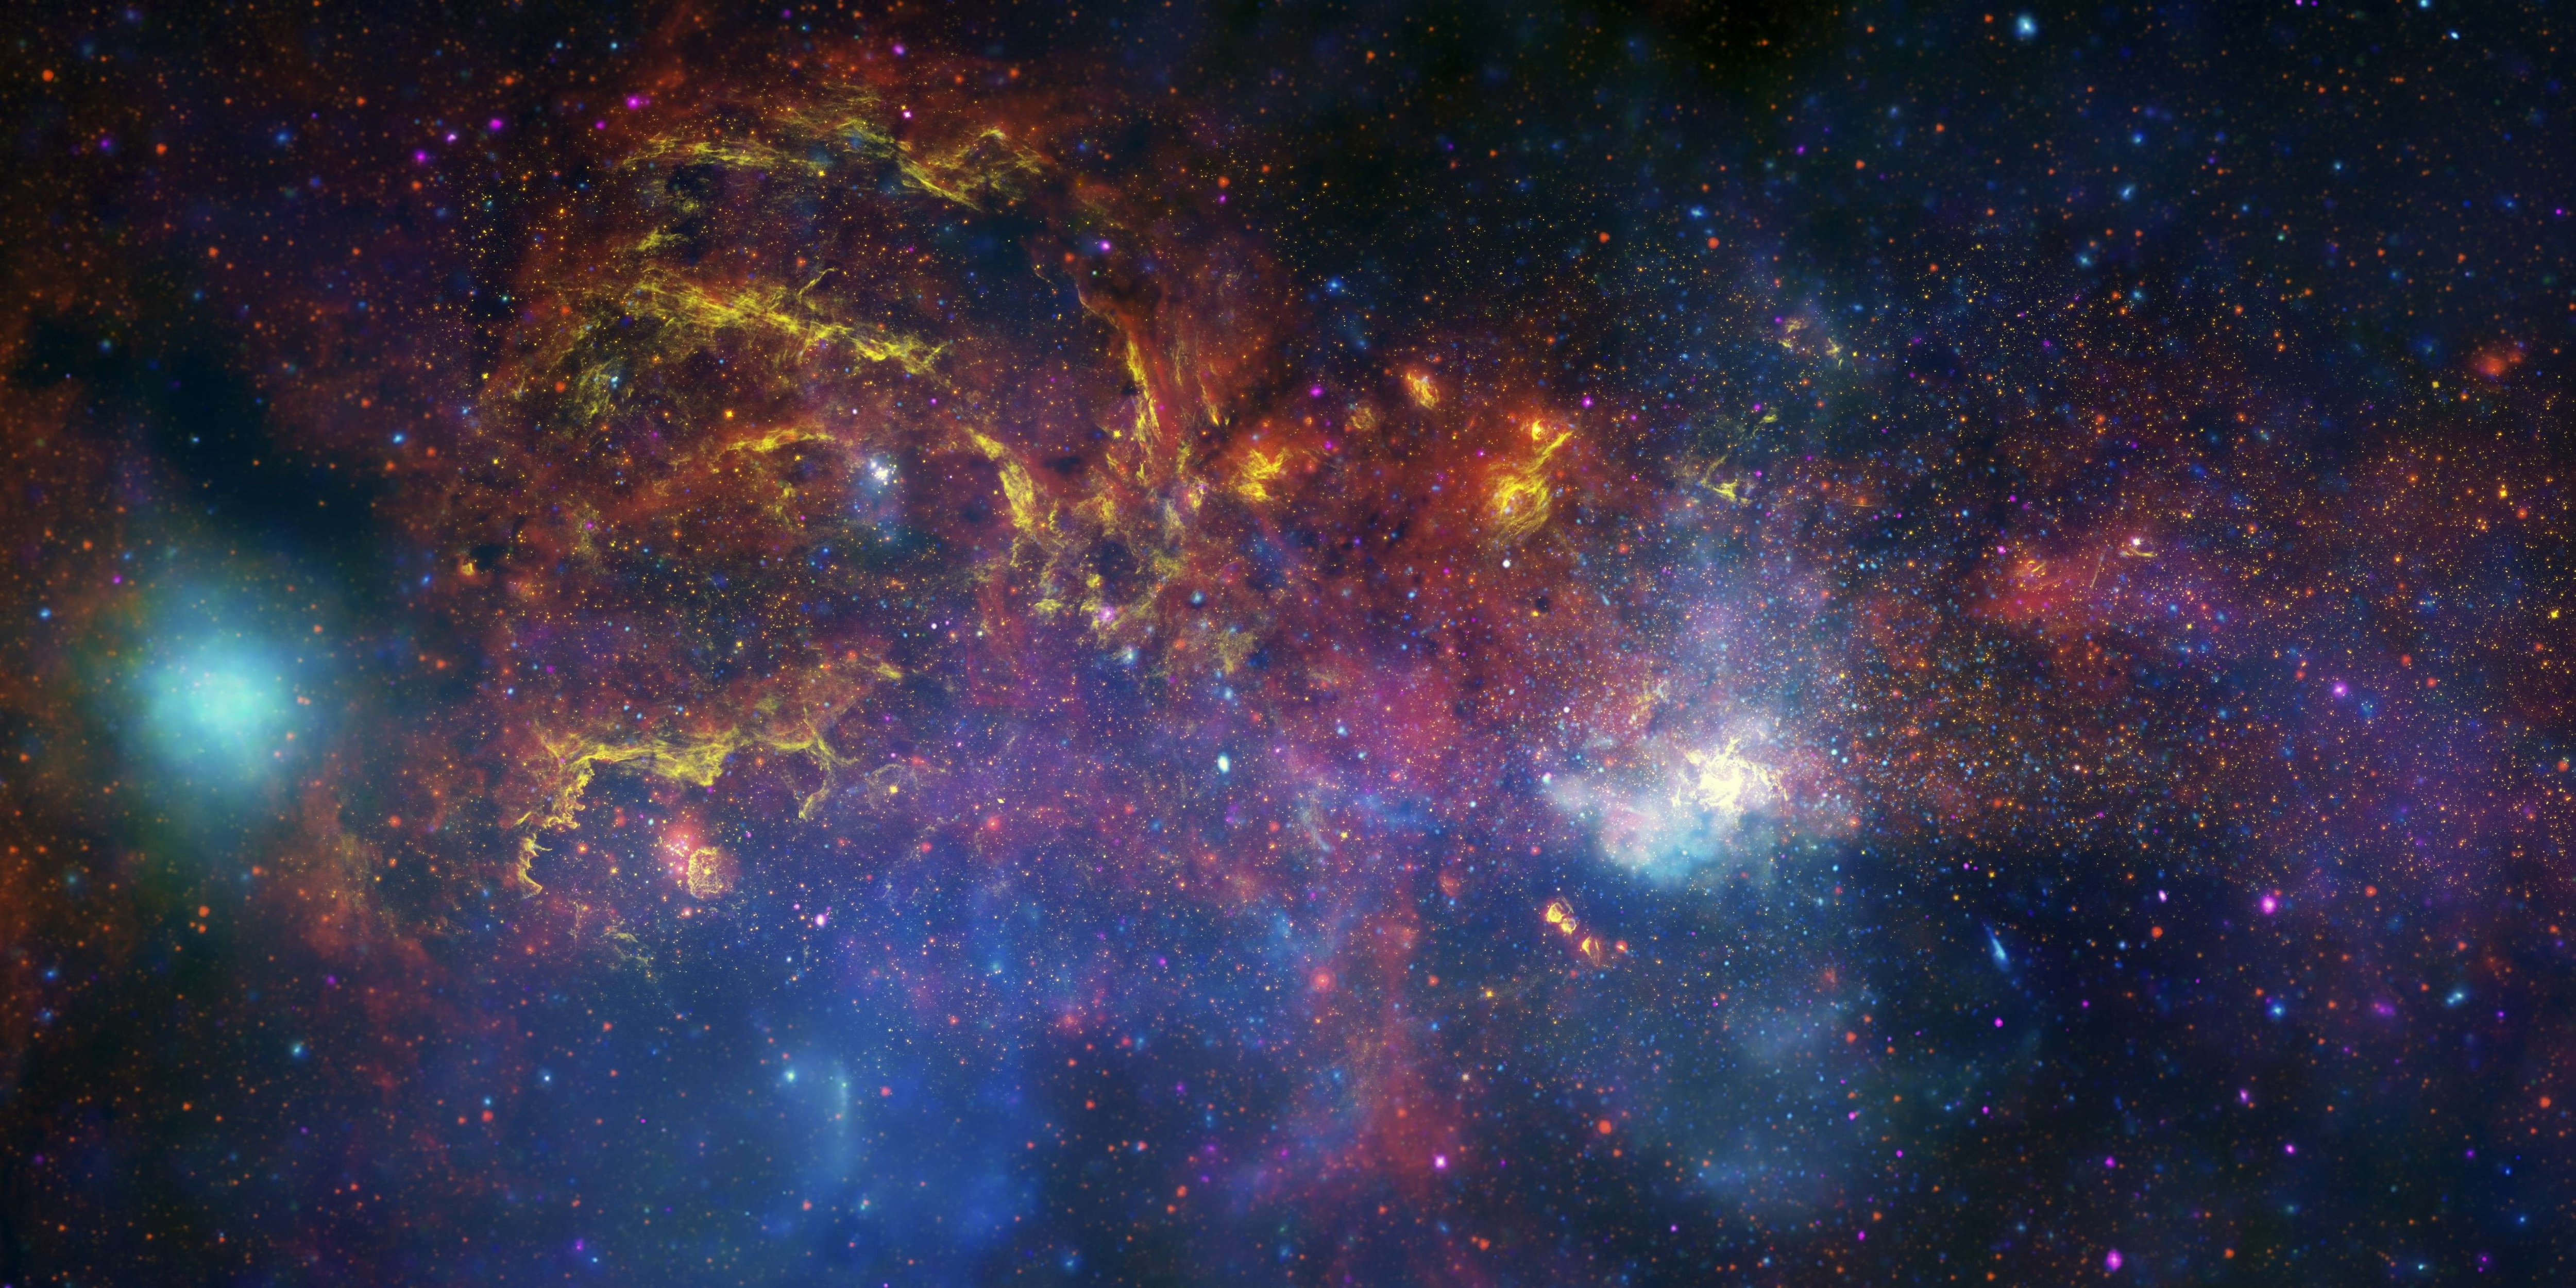 The center of the Milky Way as viewed from the Hubble telescope